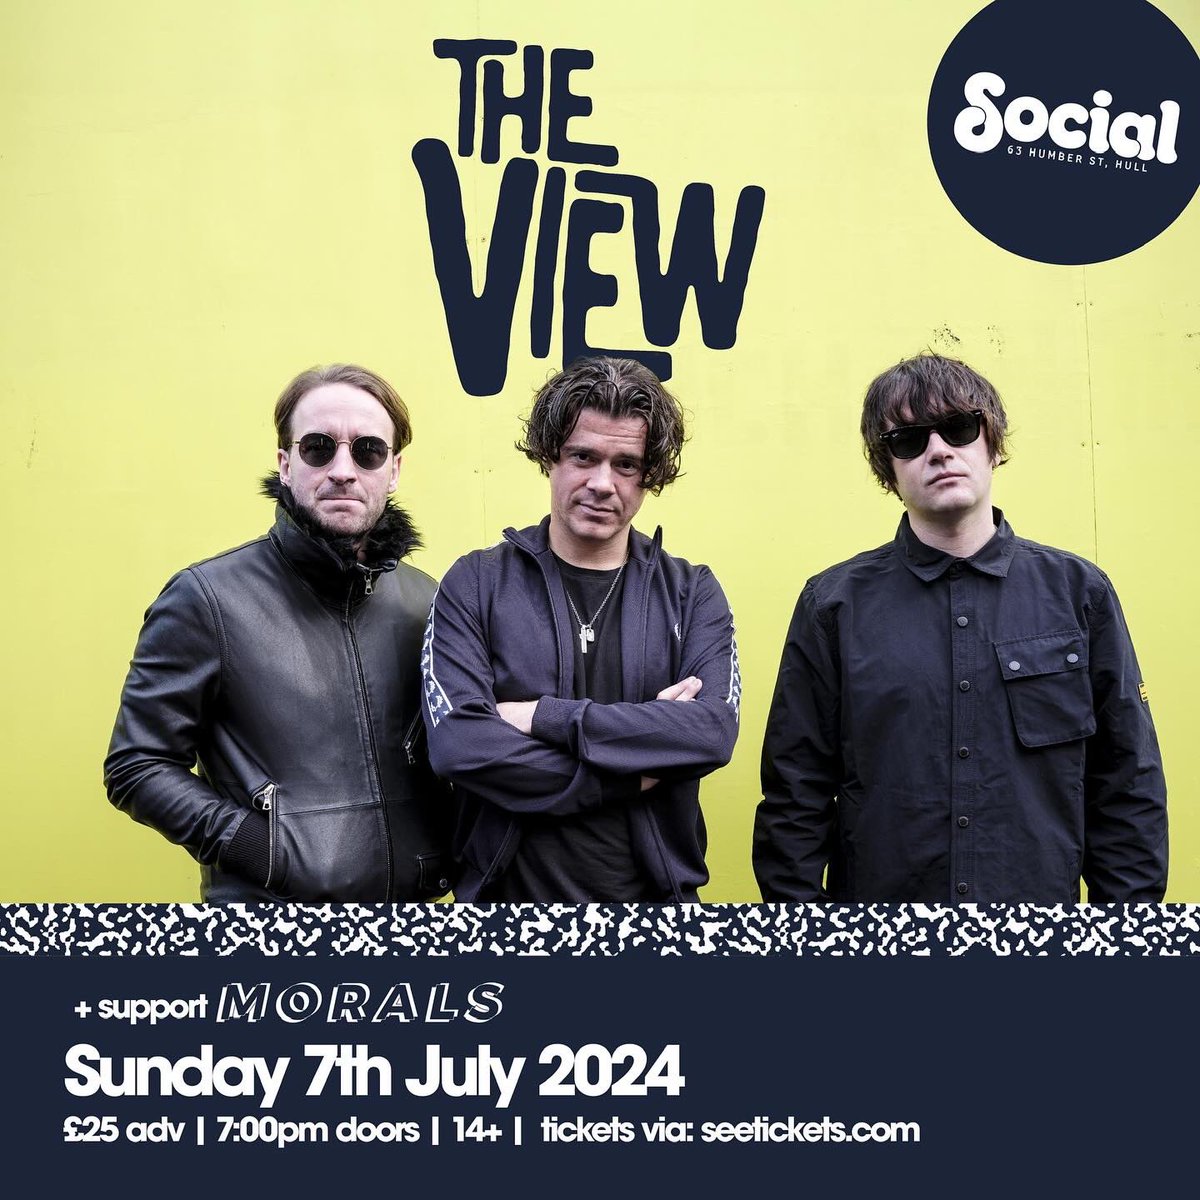 SUNNY SUMMER SUNDAY ANYONE?✖️ • Make sure you get your tickets booked for 7th July at @socialhumberst for our gig with indie legends @viewofficial with a limited amount of tickets available at a discounted cost. • @UTIEVENTS • #morals #hull #indie #ukmusic #indieband #hcafc